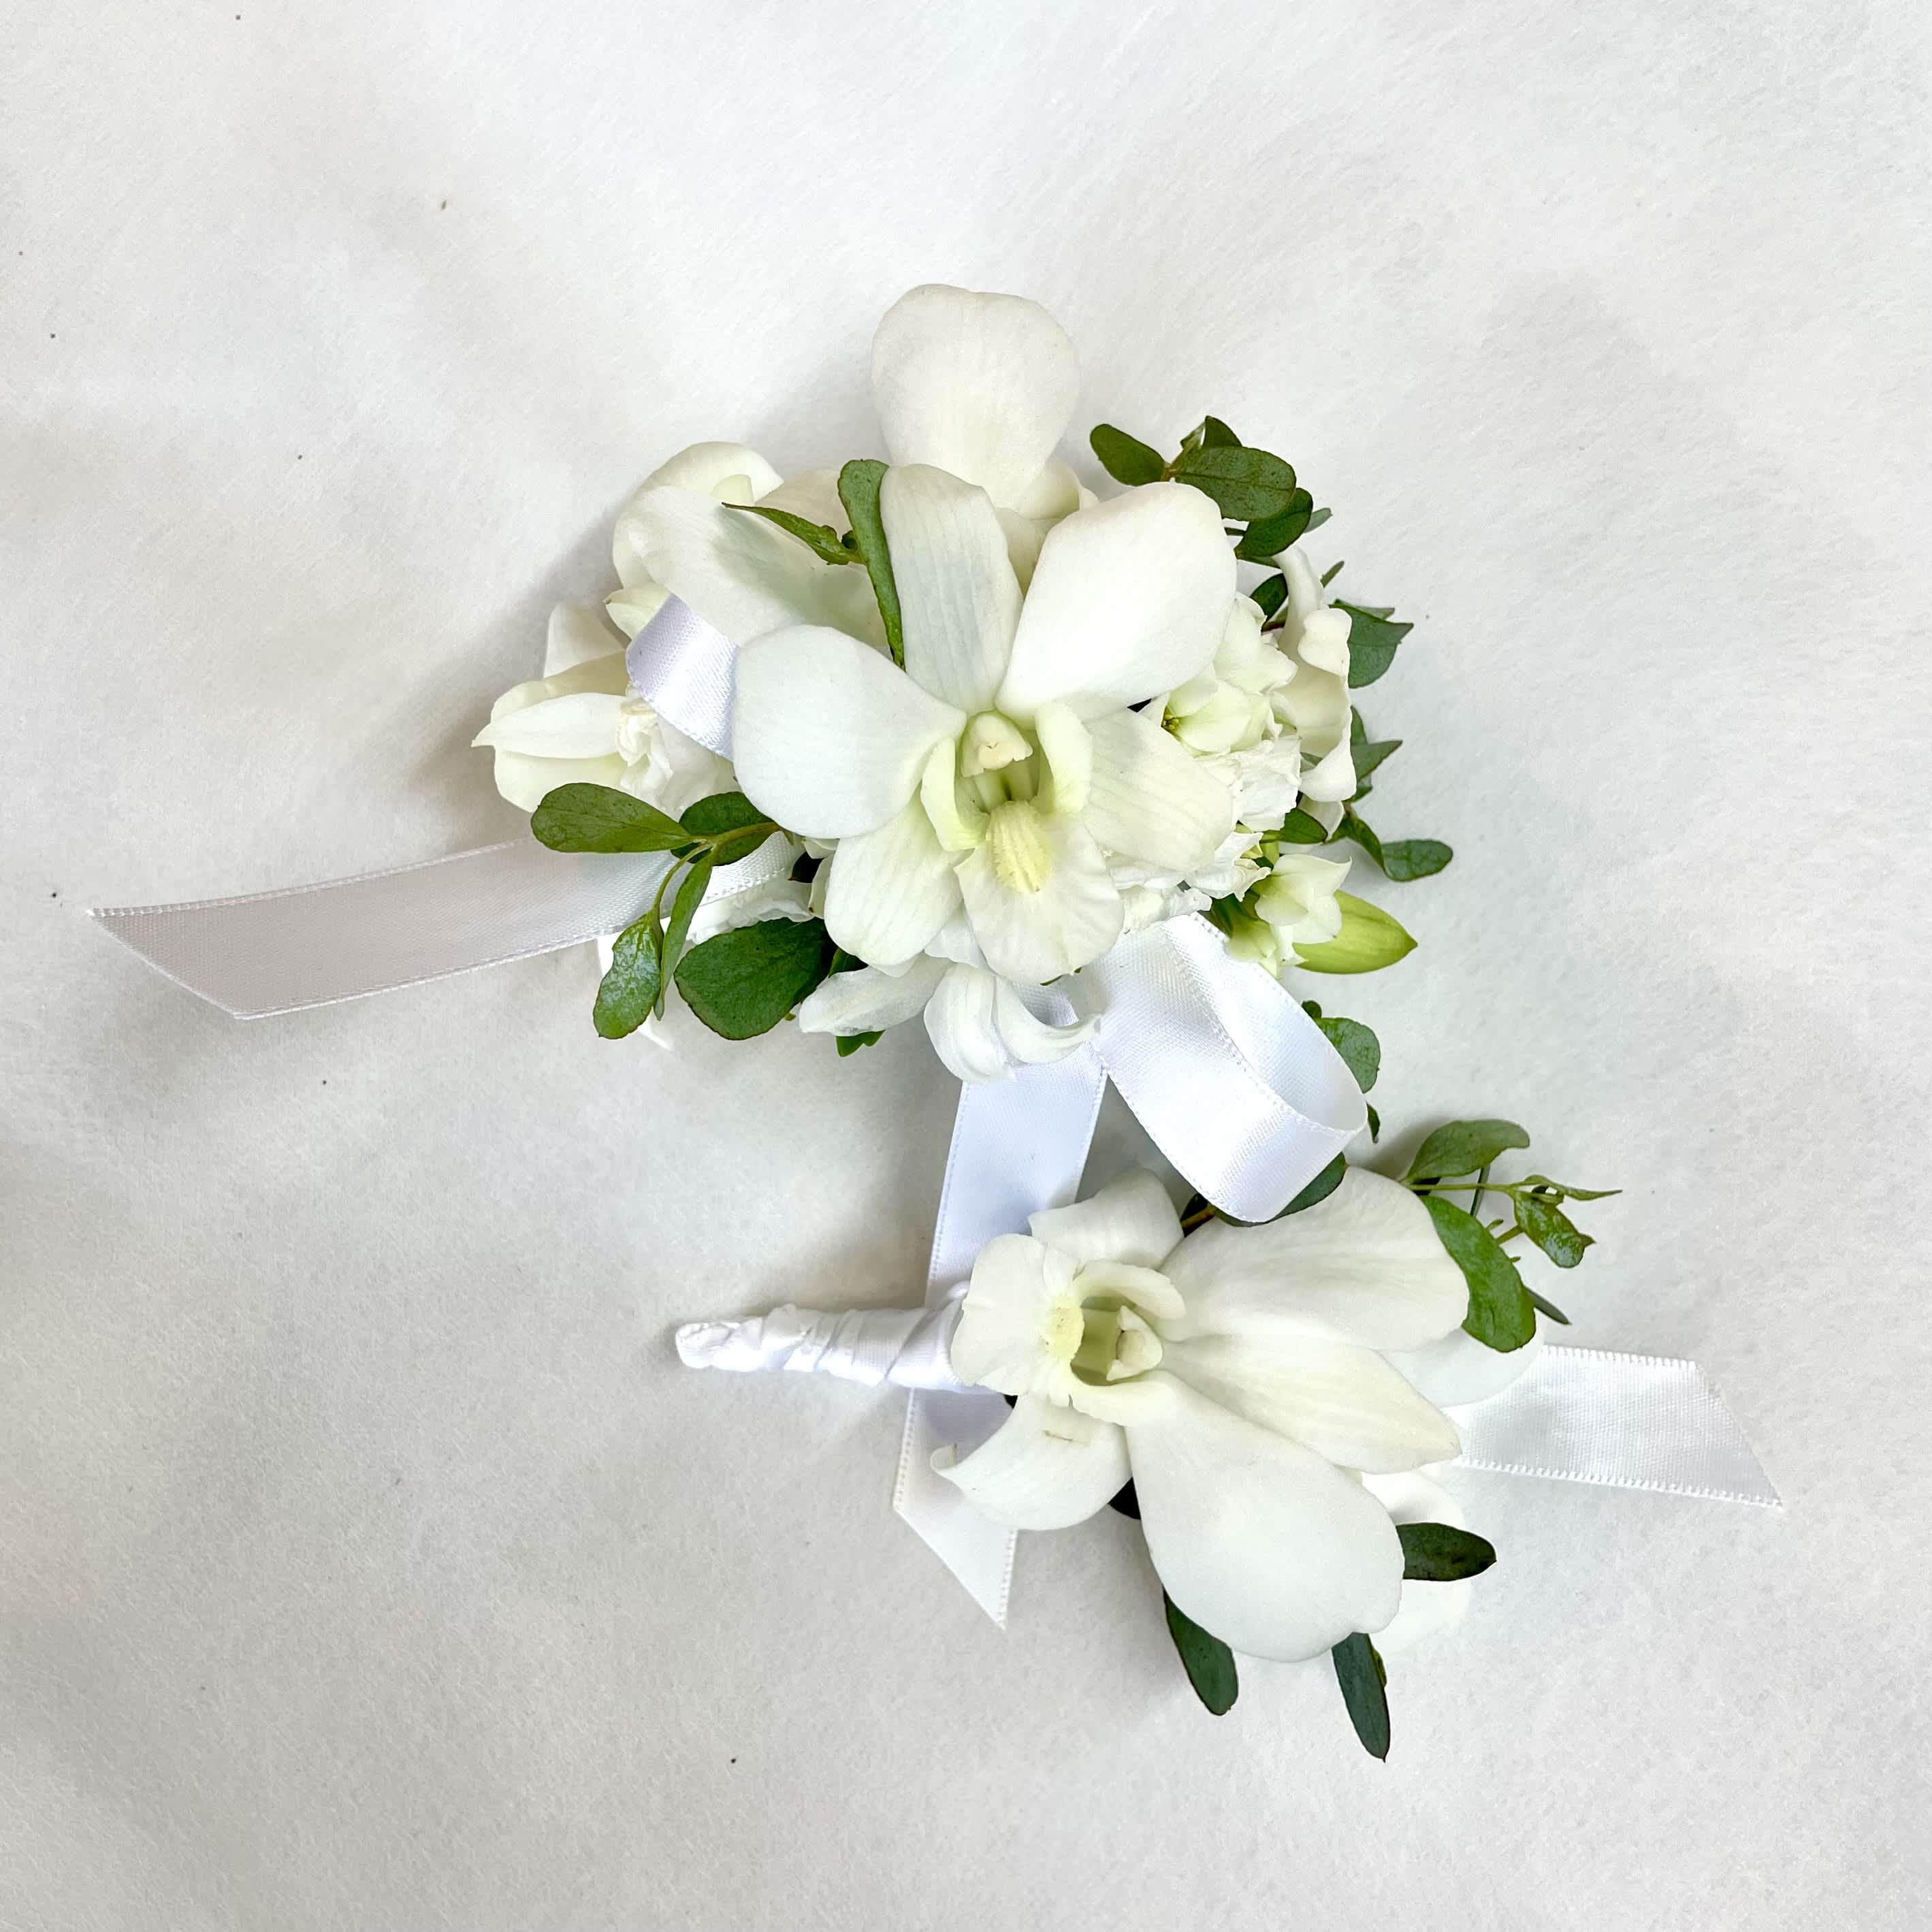 White Wrist corsage &amp; Boutonnière  - Classic white wrist corsage and boutonnière with orchid and other blooms. The corsage is fastened to a snap bracelet to accomodate all wrist sizes. The boutonnière comes with both magnets and pins for attachment depending on preference.